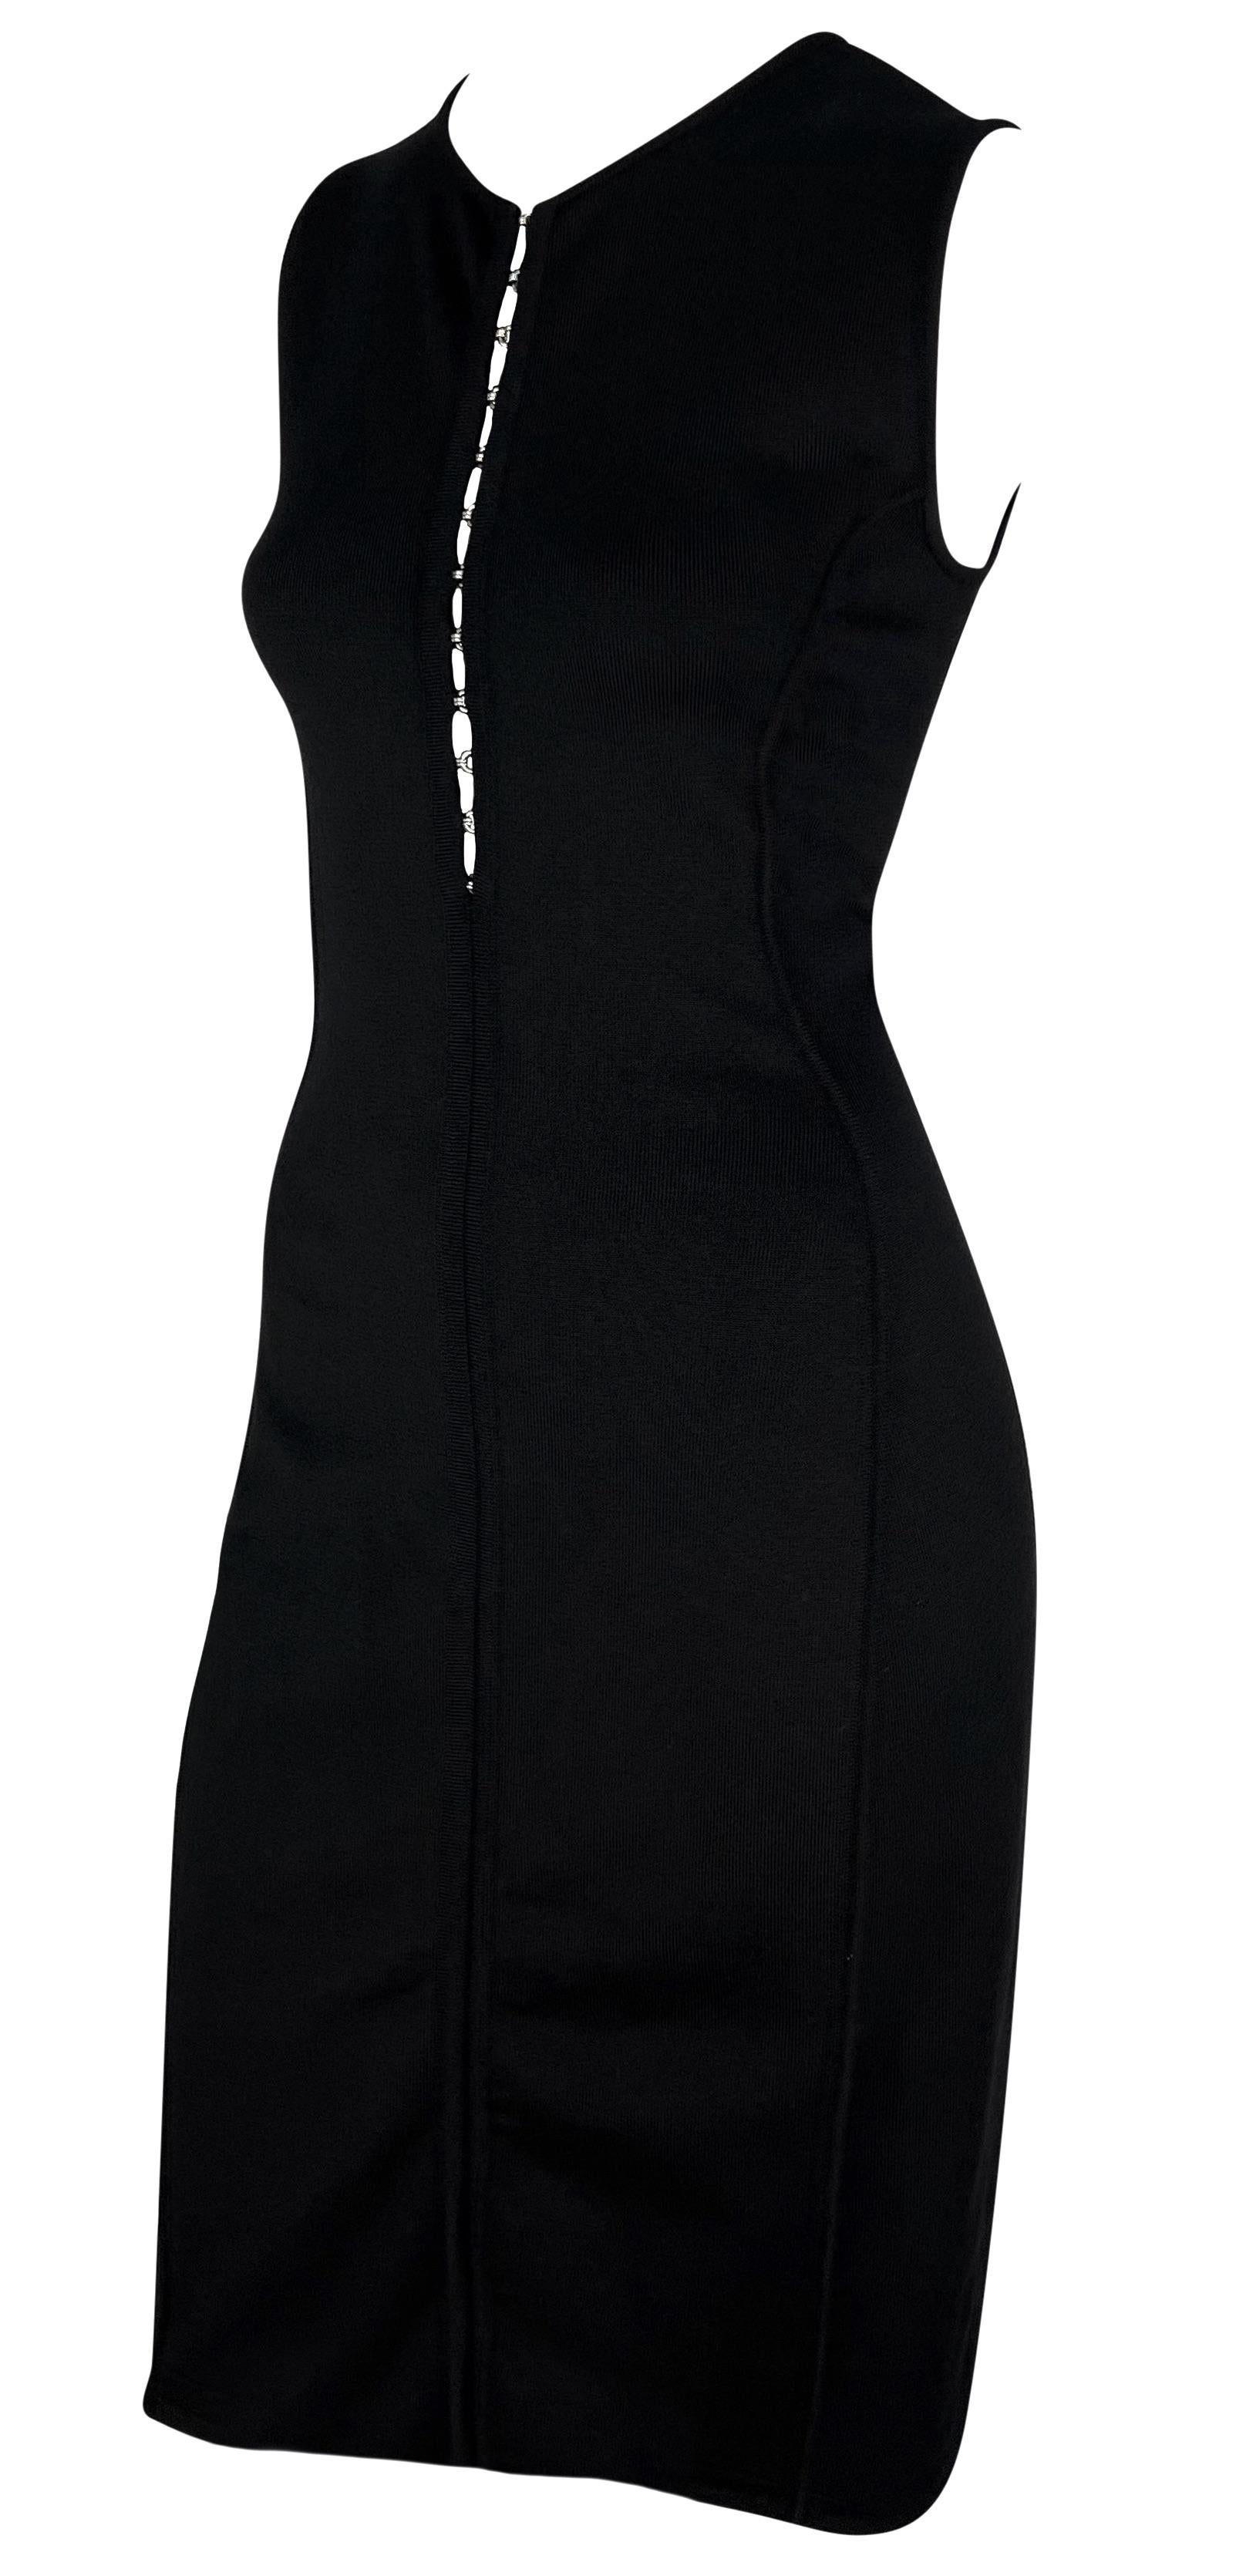 S/S 2002 Gianni Versace by Donatella Black Bodycon Hook Eye Plunging Knit Dress In Excellent Condition For Sale In West Hollywood, CA